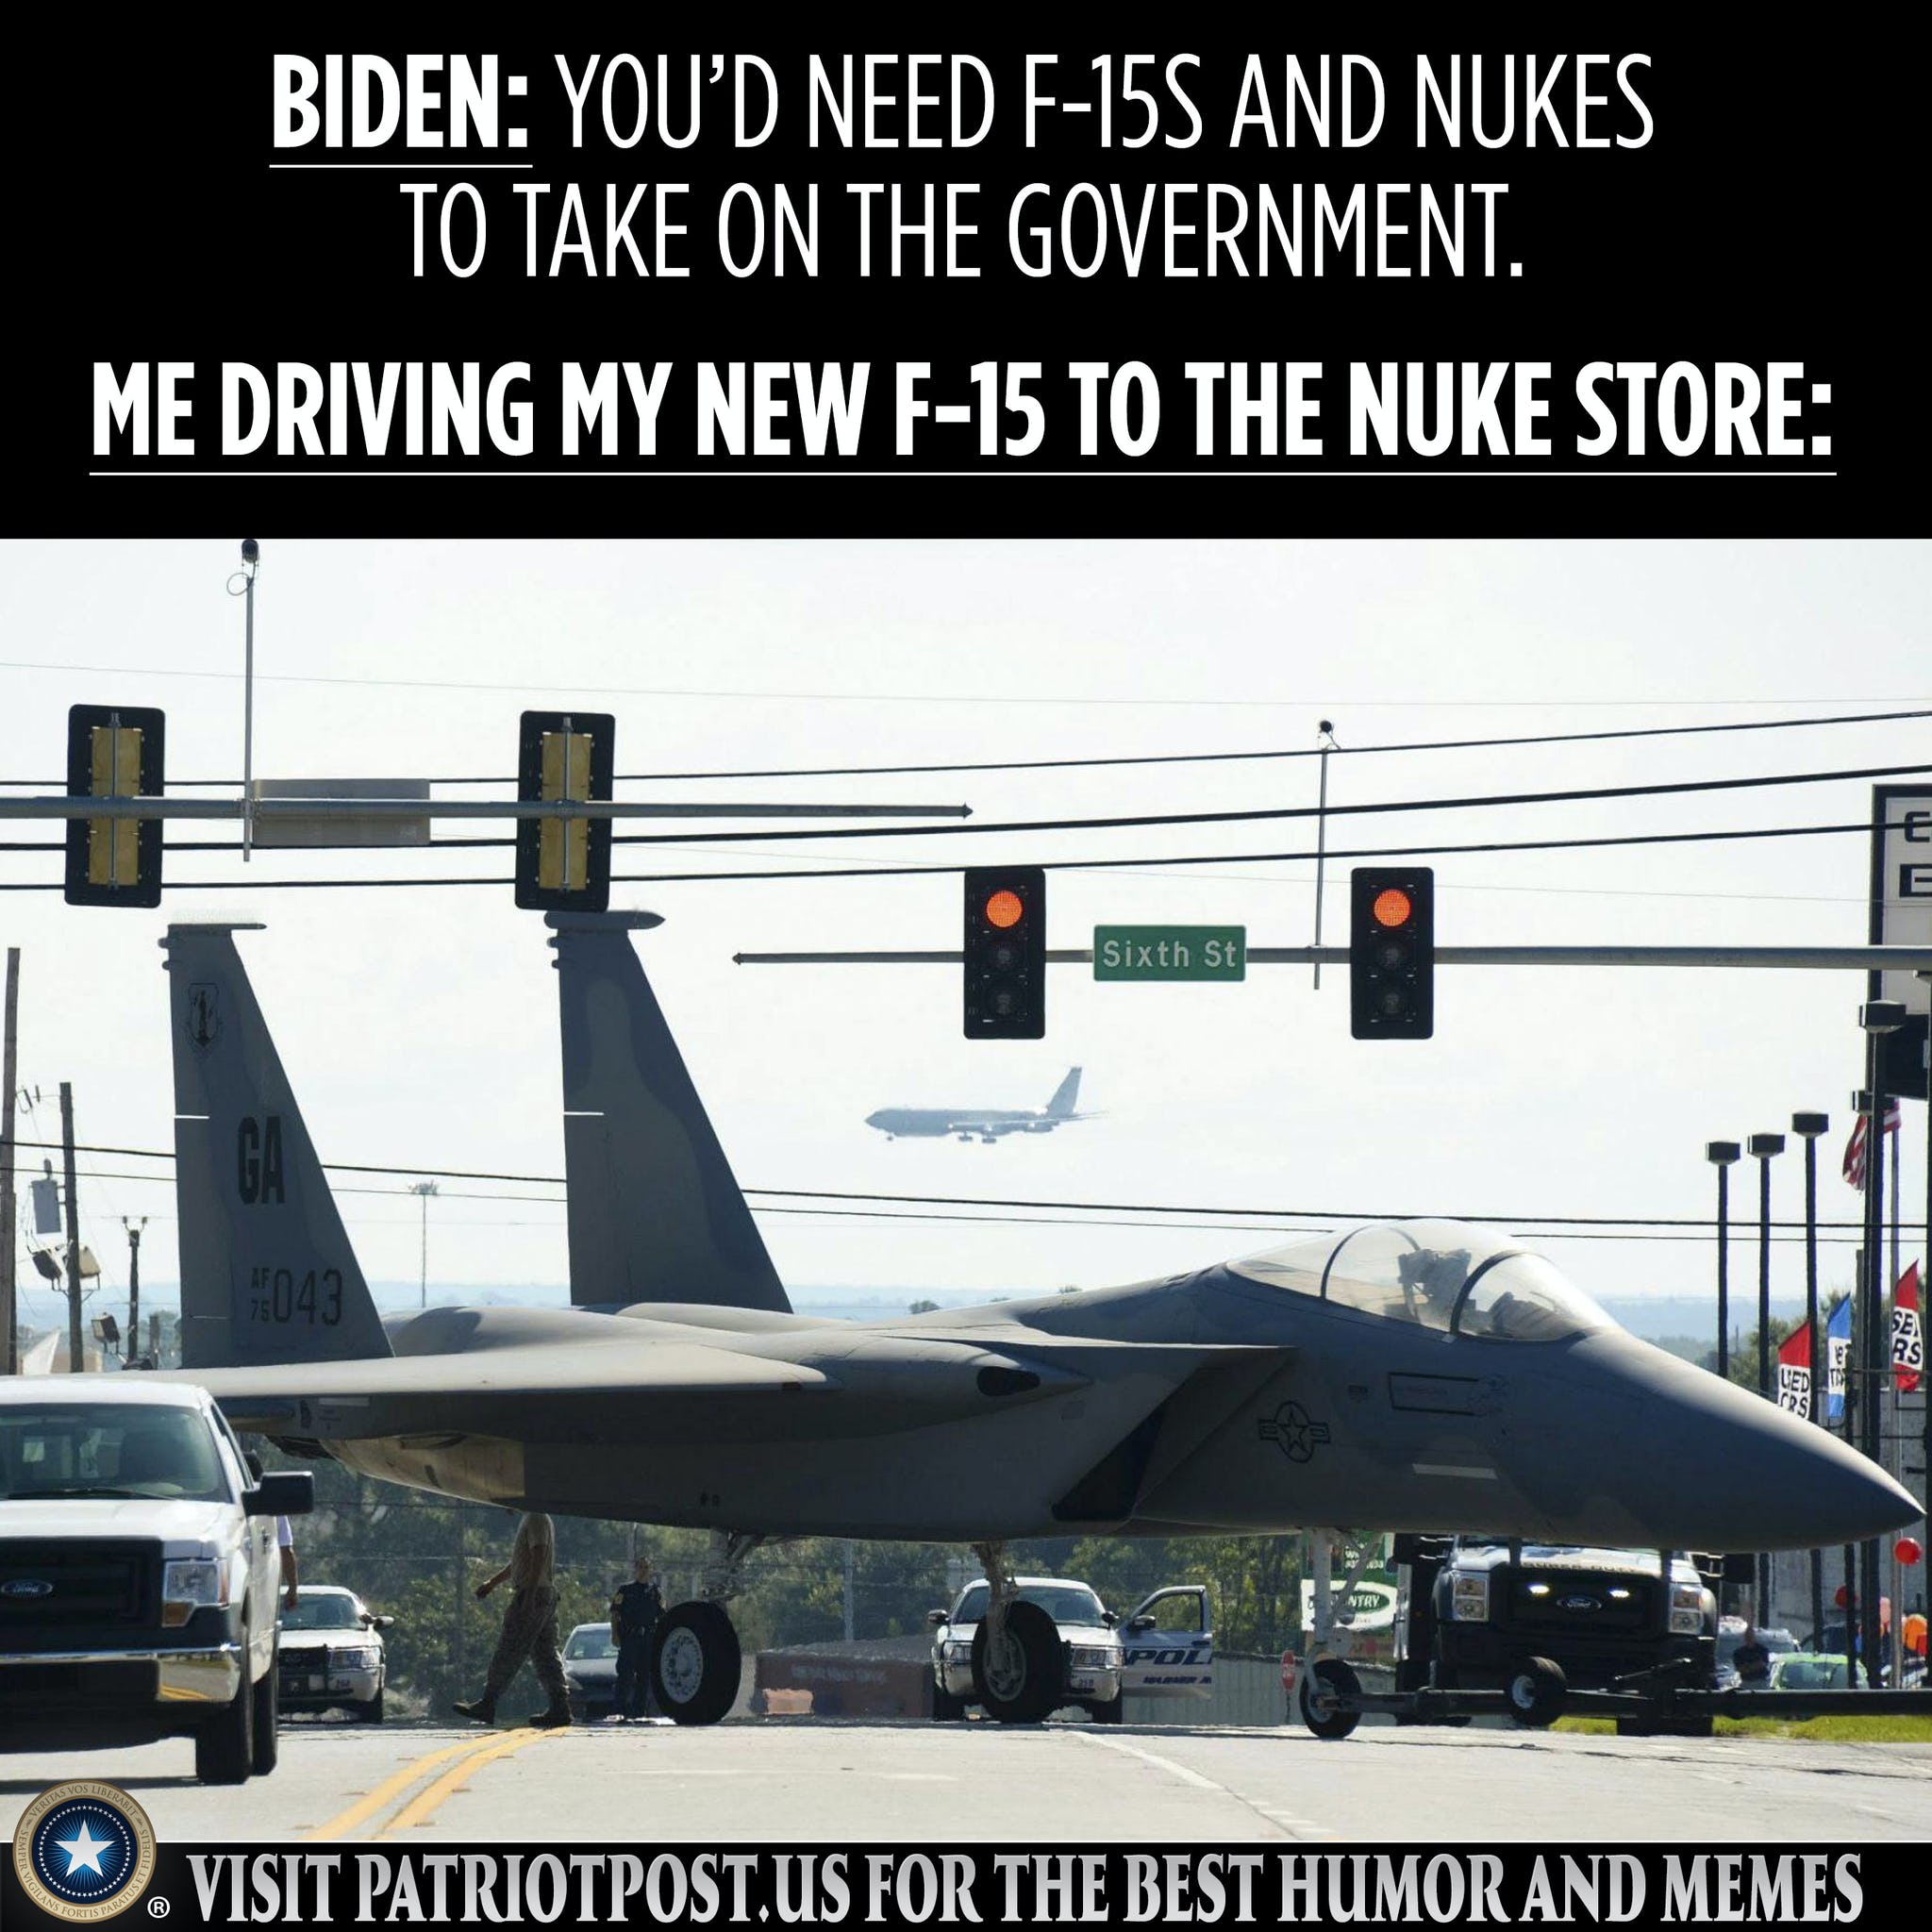 Driving my F-15 to the nuke store.